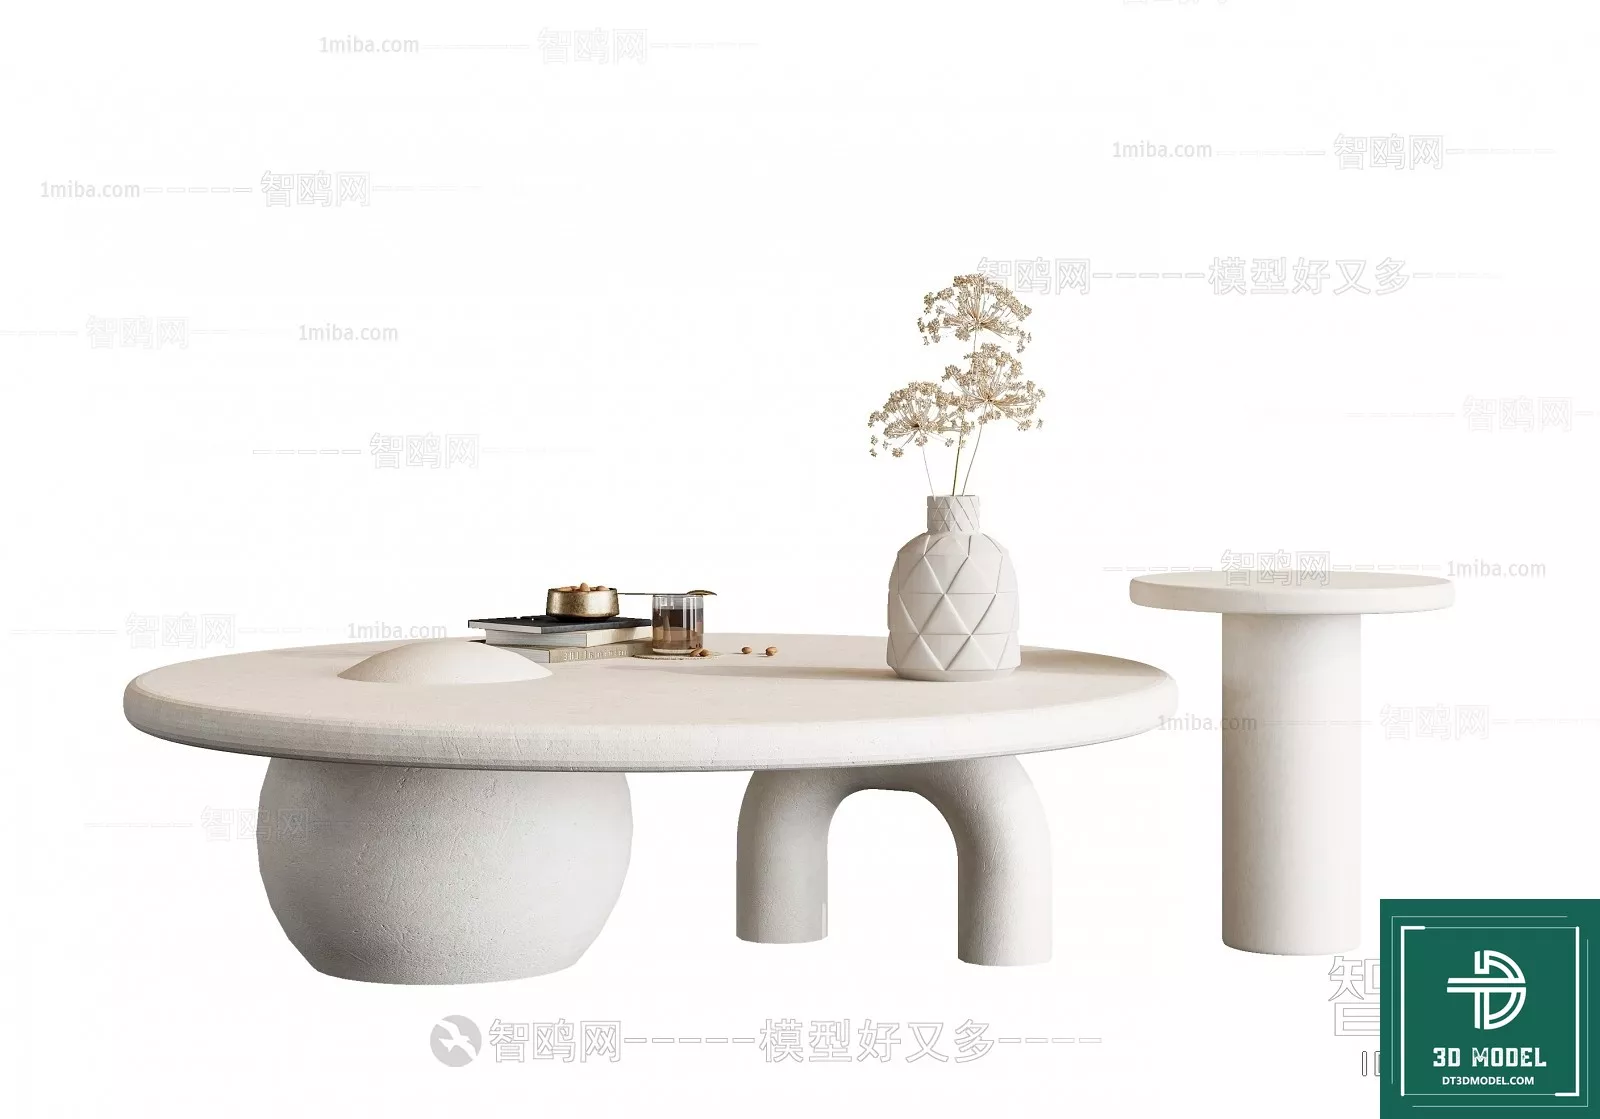 MODERN TEA TABLE - SKETCHUP 3D MODEL - VRAY OR ENSCAPE - ID14953